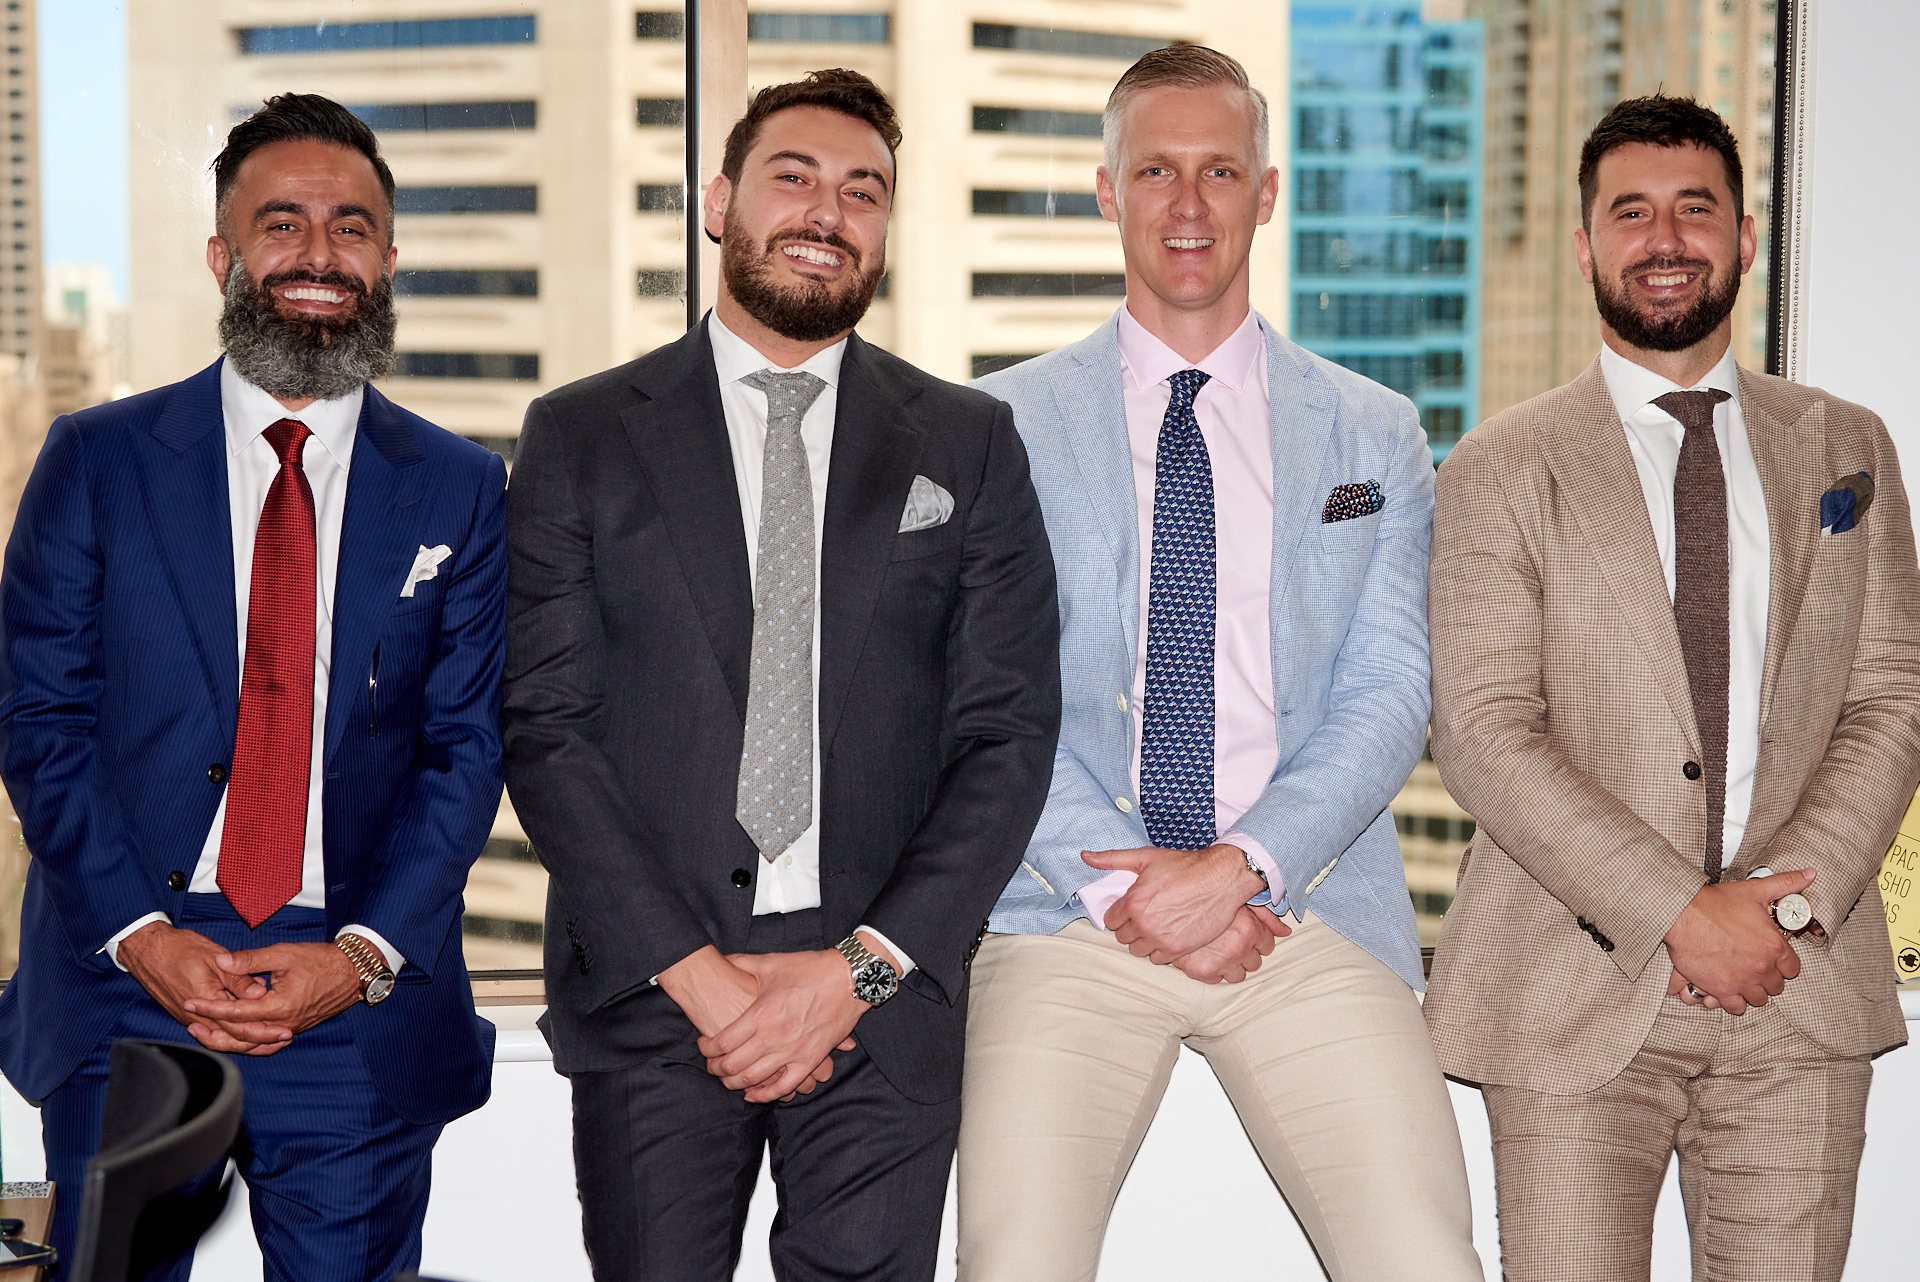 Corporate Team Office Photo. 4 Males in Suits